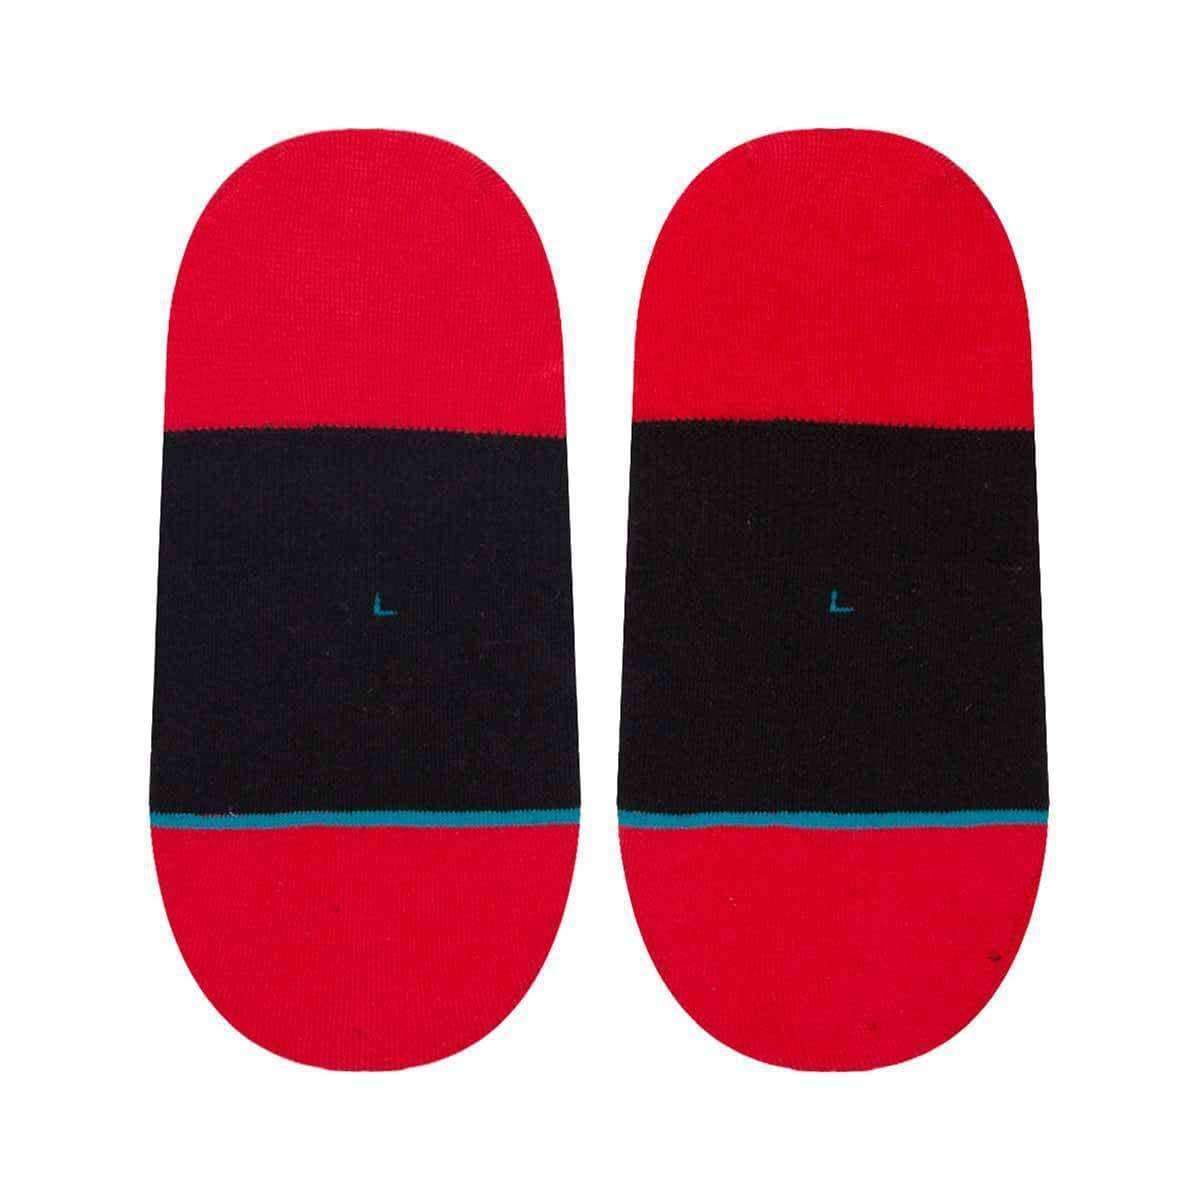 Stance NBA Arena Blazers Invisible Low Socks in Black Mens Low/Ankle Socks by Stance